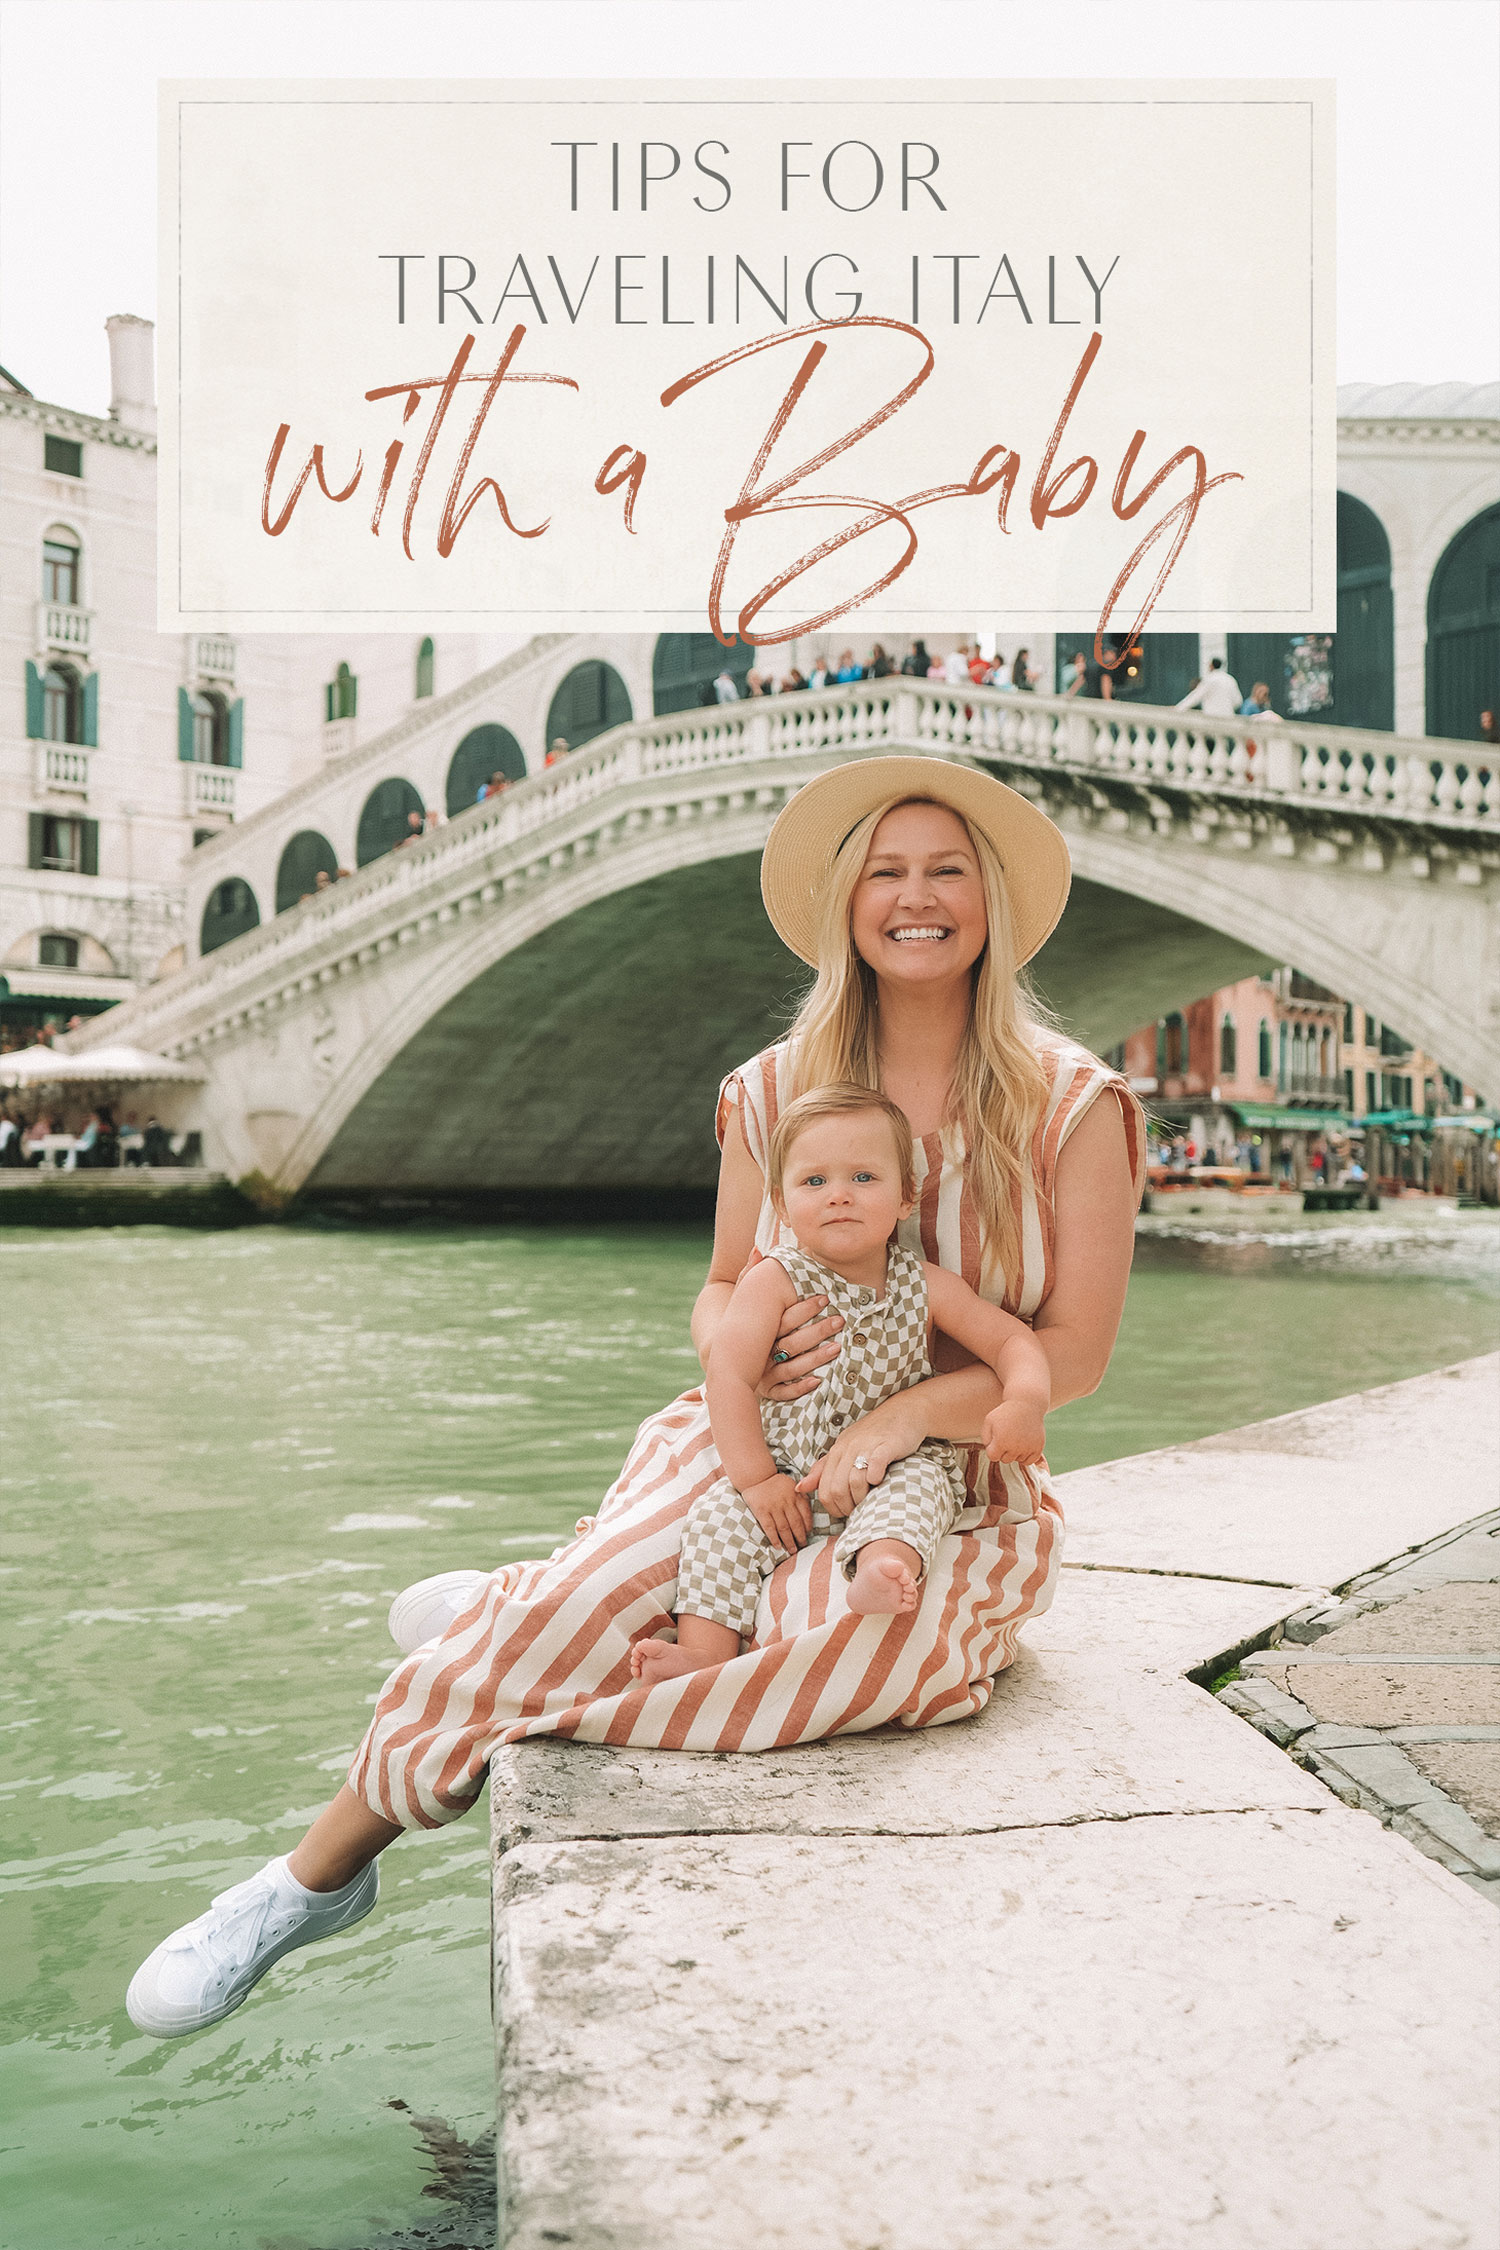 Tips for Traveling Italy with a Baby